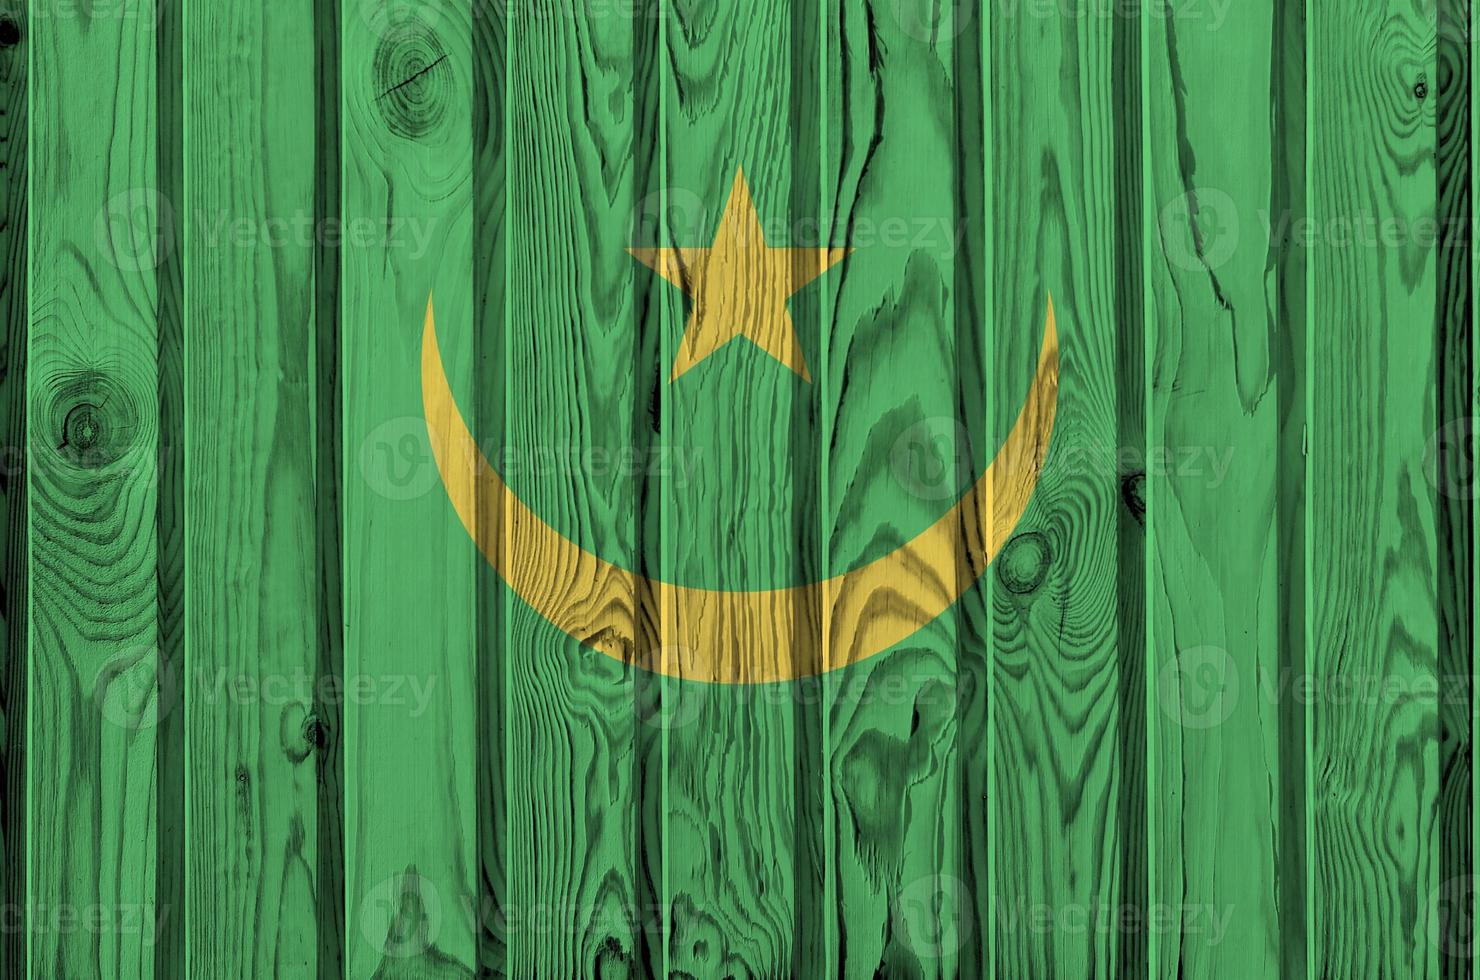 Mauritania flag depicted in bright paint colors on old wooden wall. Textured banner on rough background photo